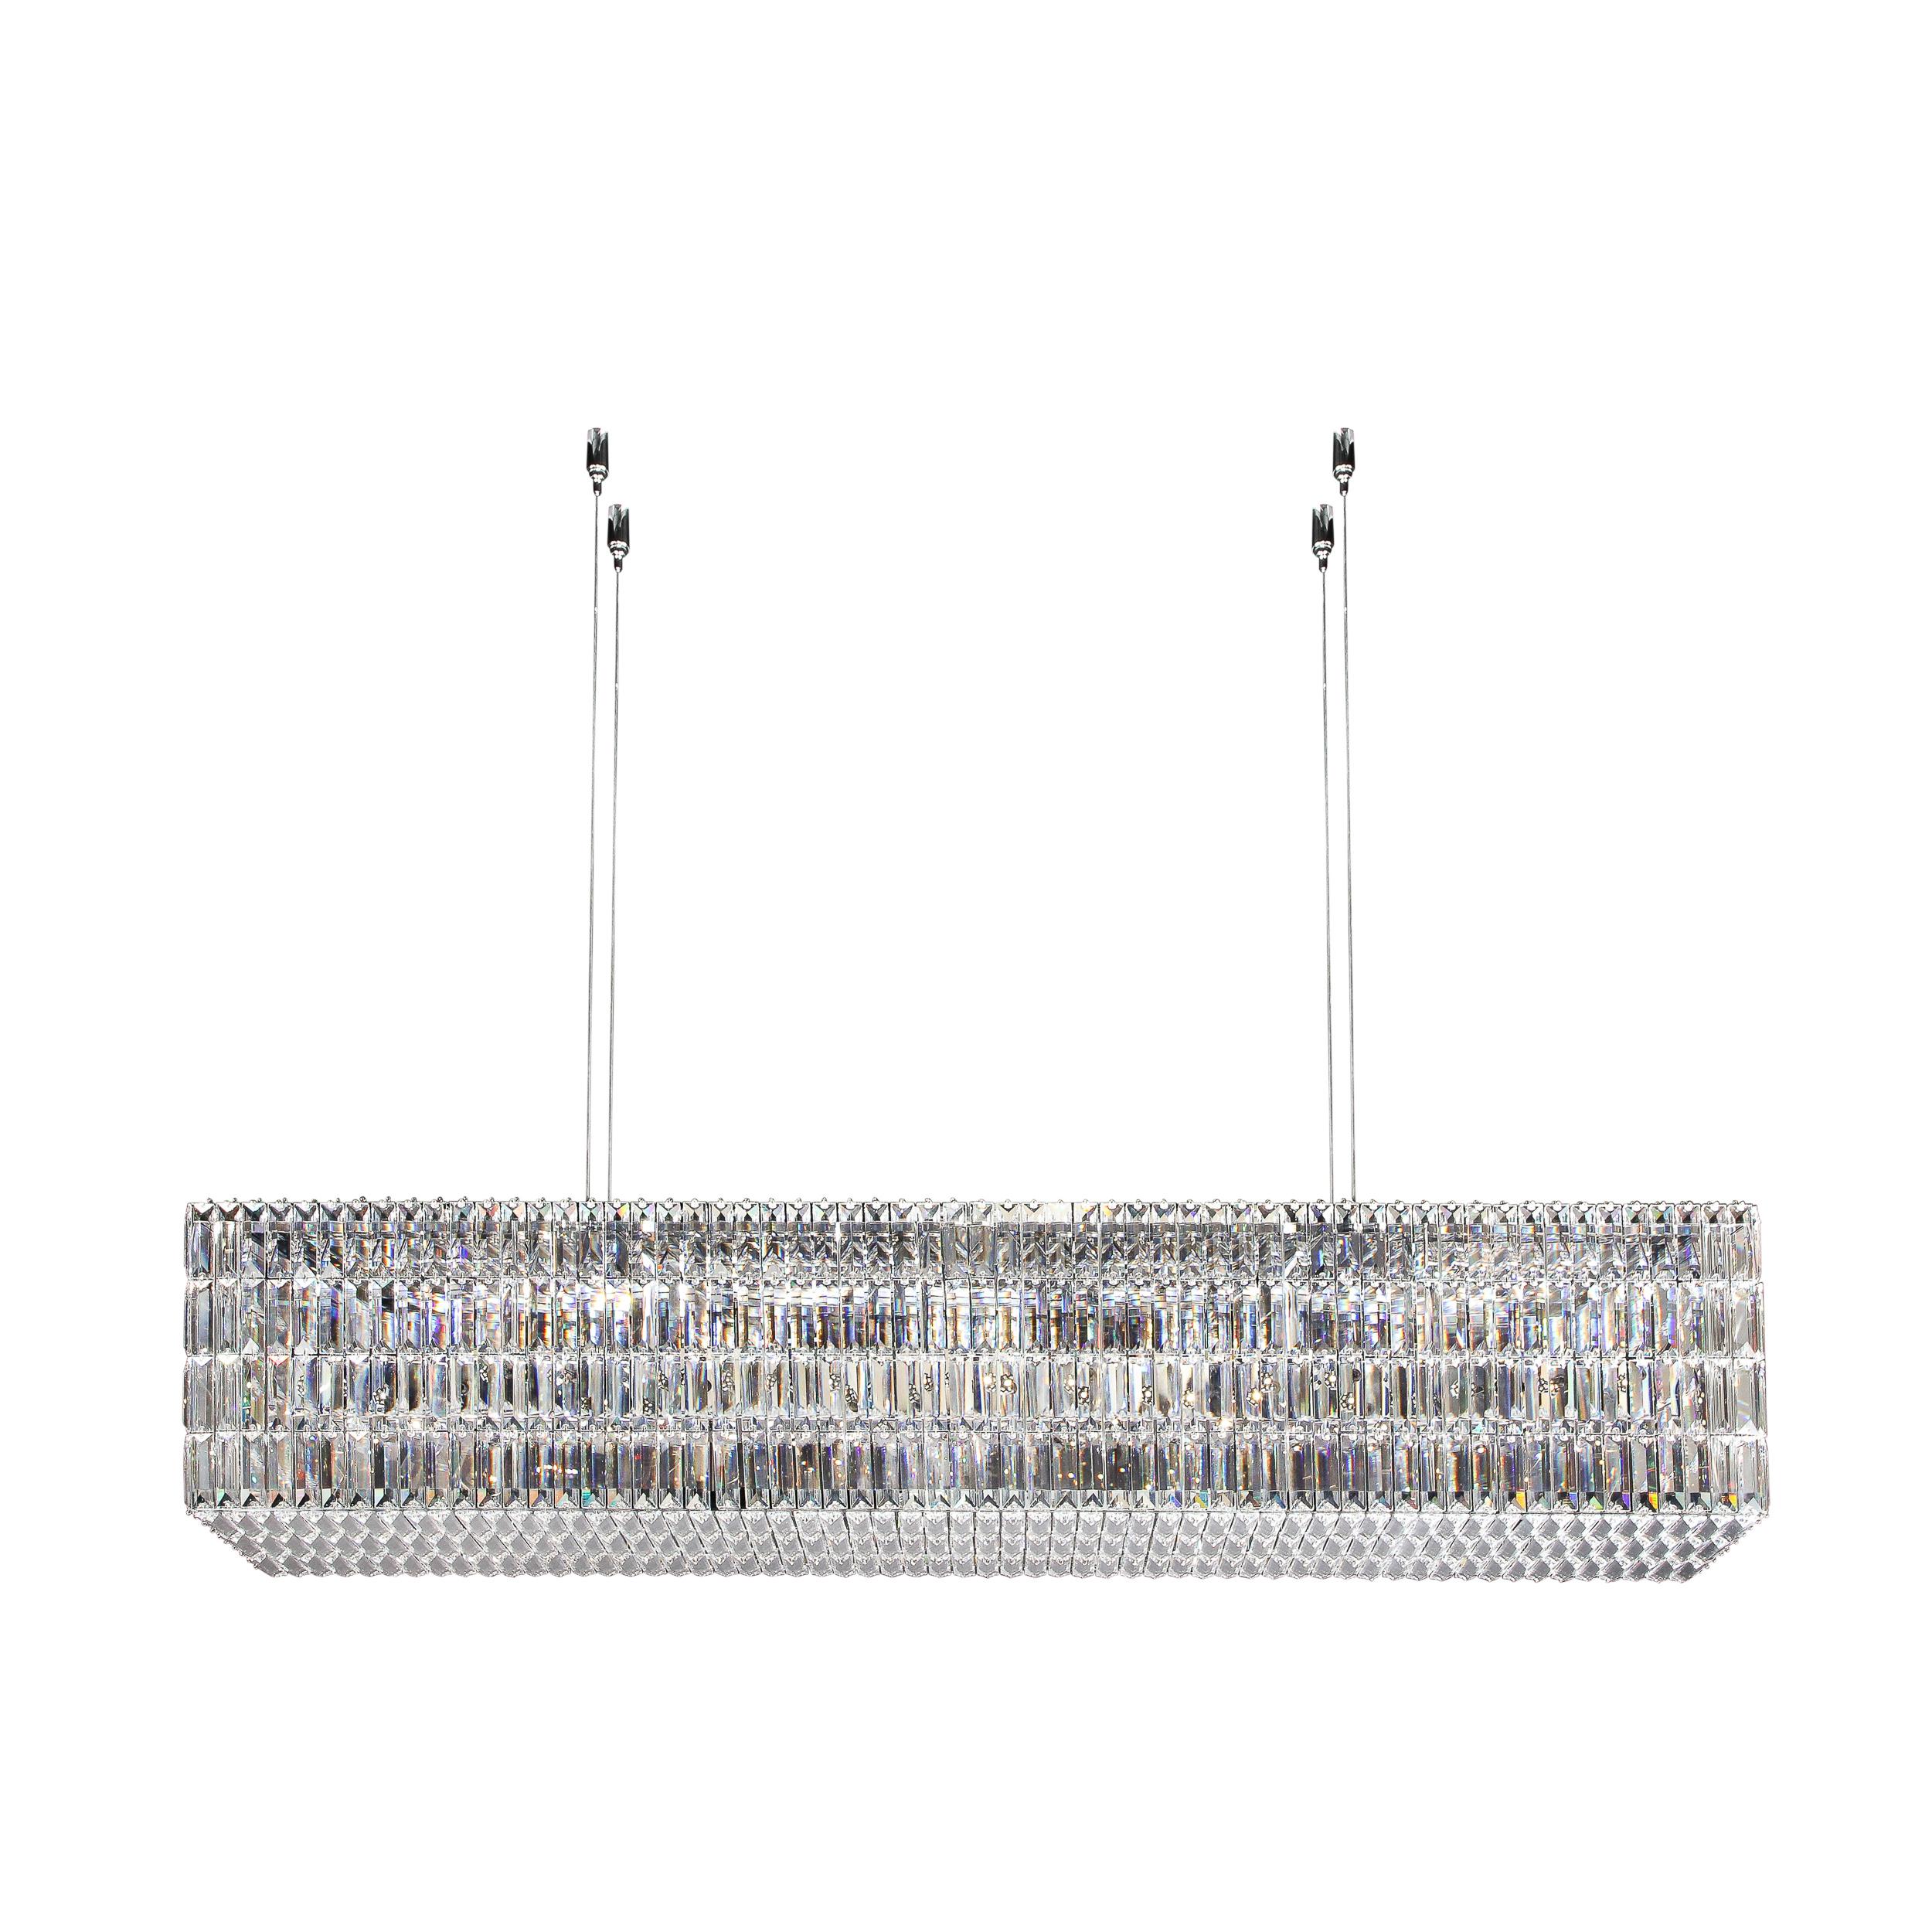 This jaw dropping chandelier was realized by the illustrious crystal company Swarovski- one of the world's premiere luxury brands- in Austria circa 2009. The piece features a volumetric rectangular form of faceted crystals like a sea of shimmering